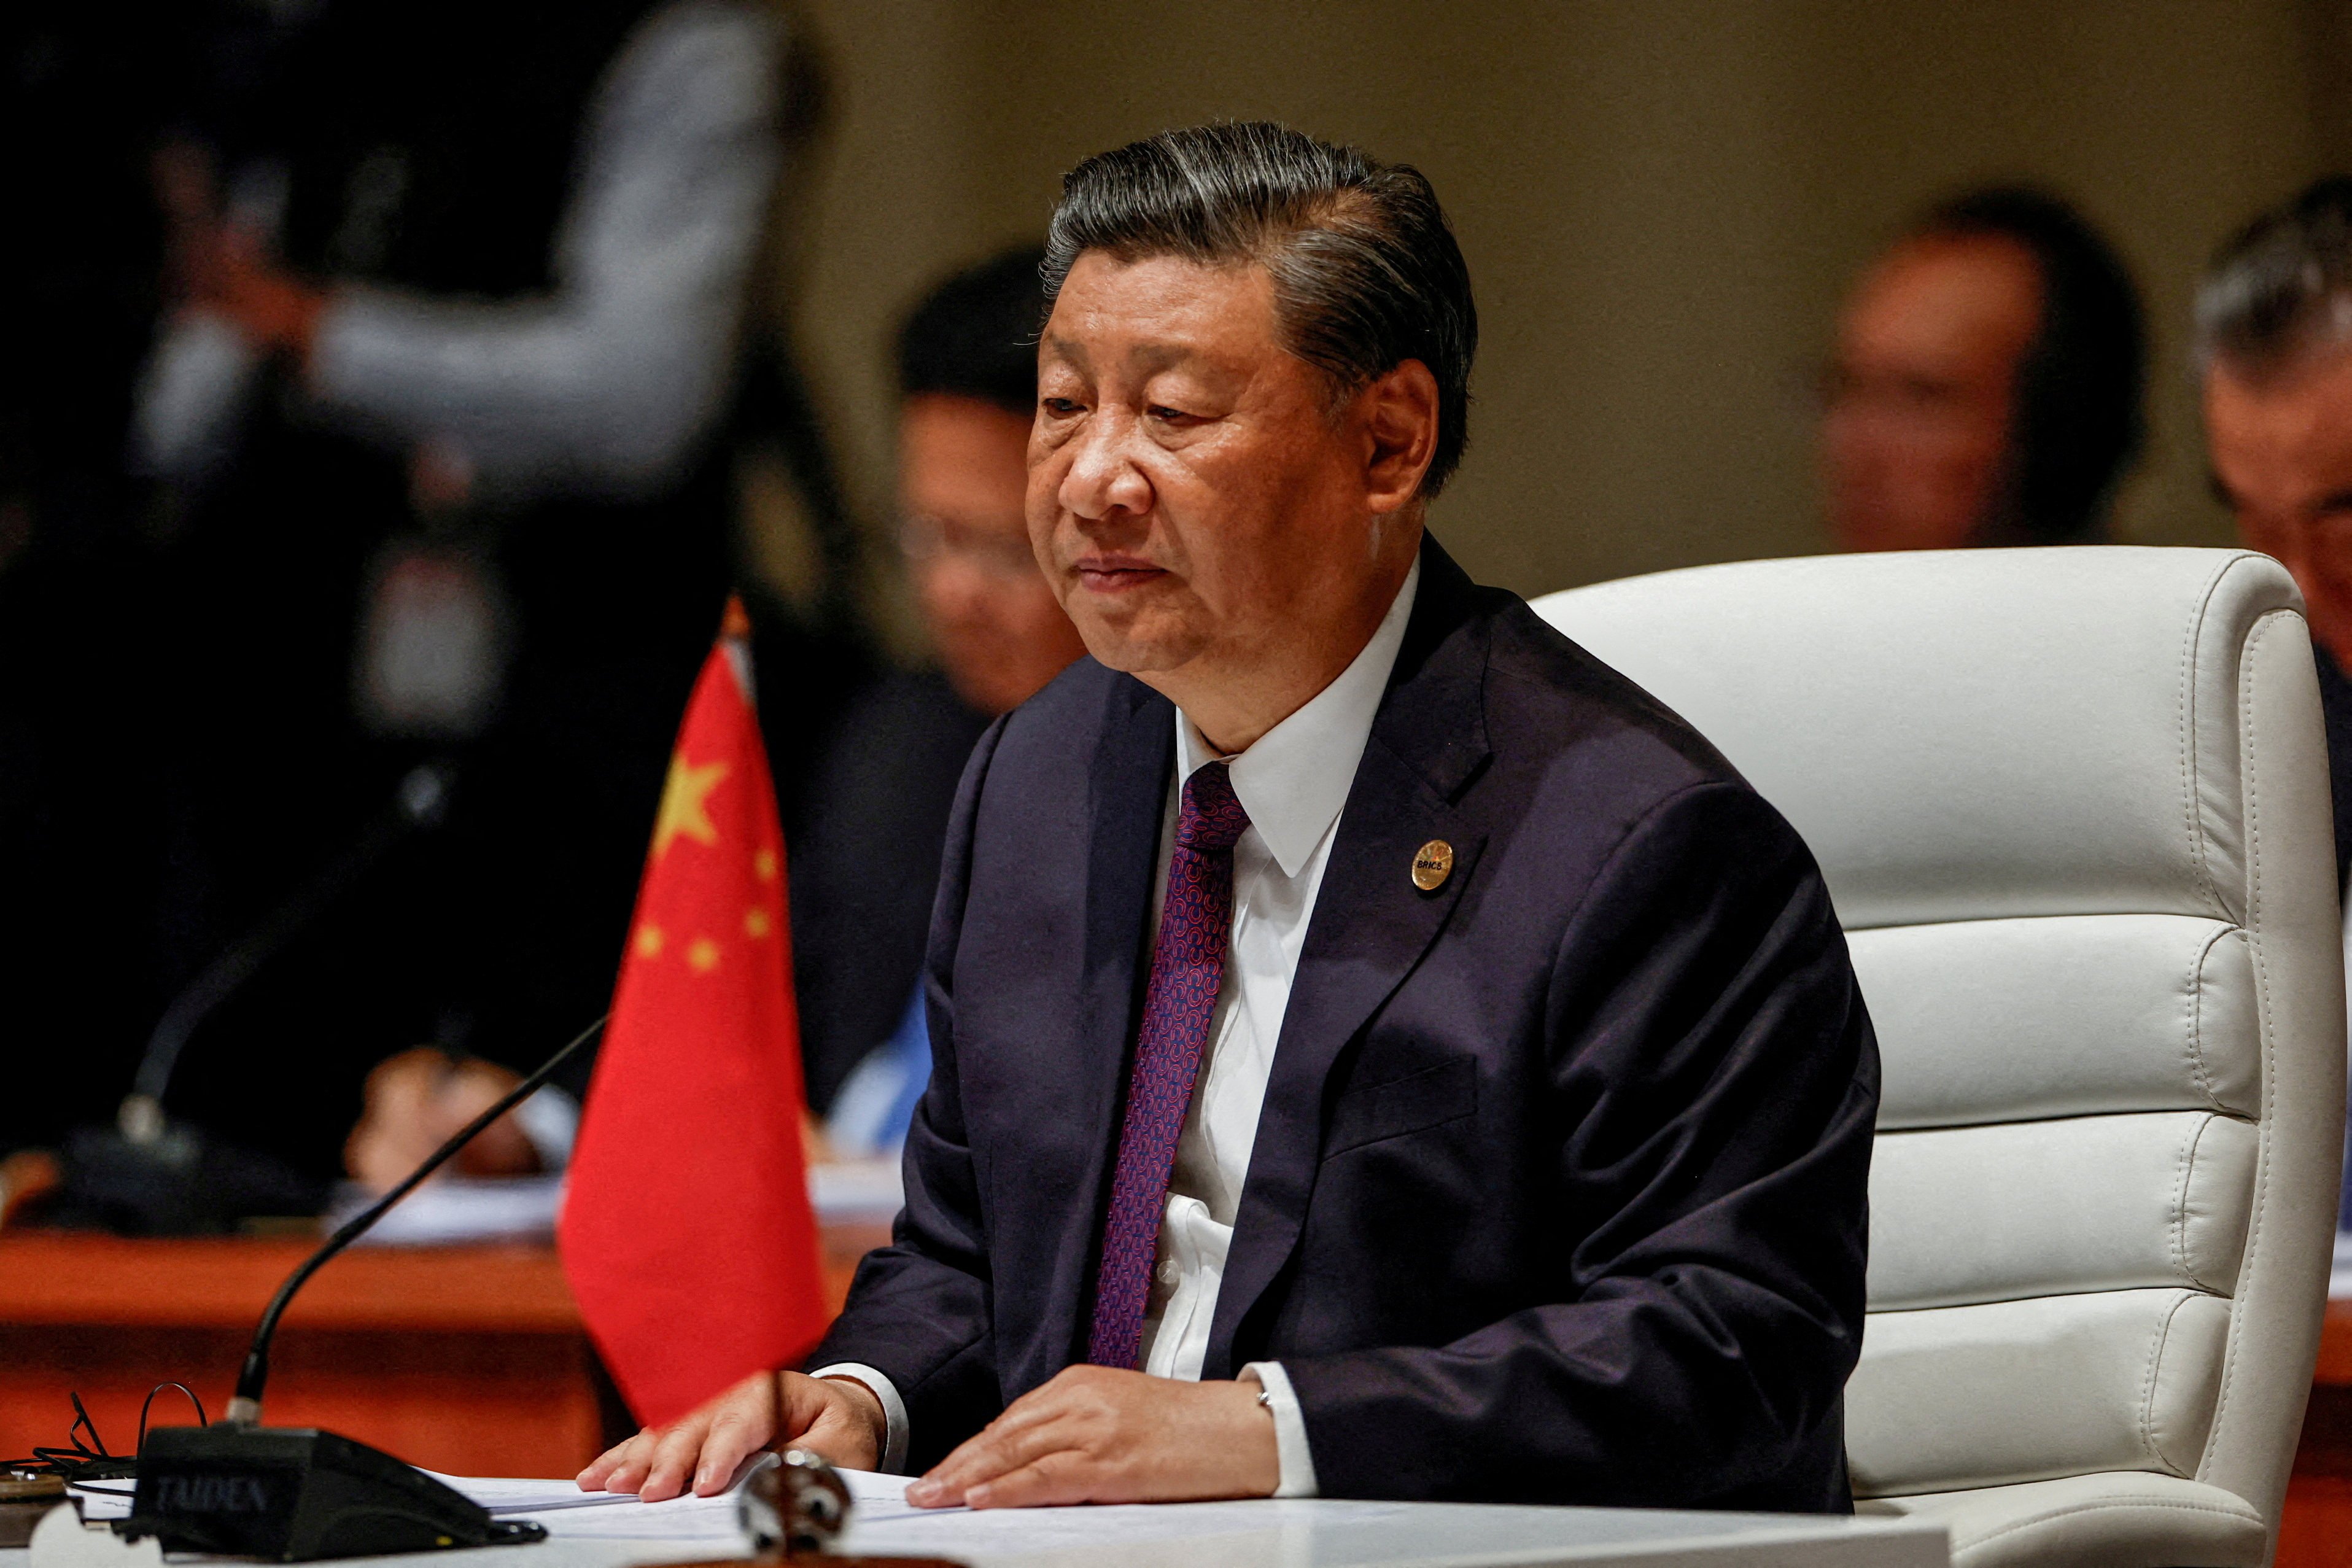 The anti-corruption campaign is Xi Jinping’s “major political achievement and an effective mobilisation tool within the party”, according to an analyst. Photo: via Reuters